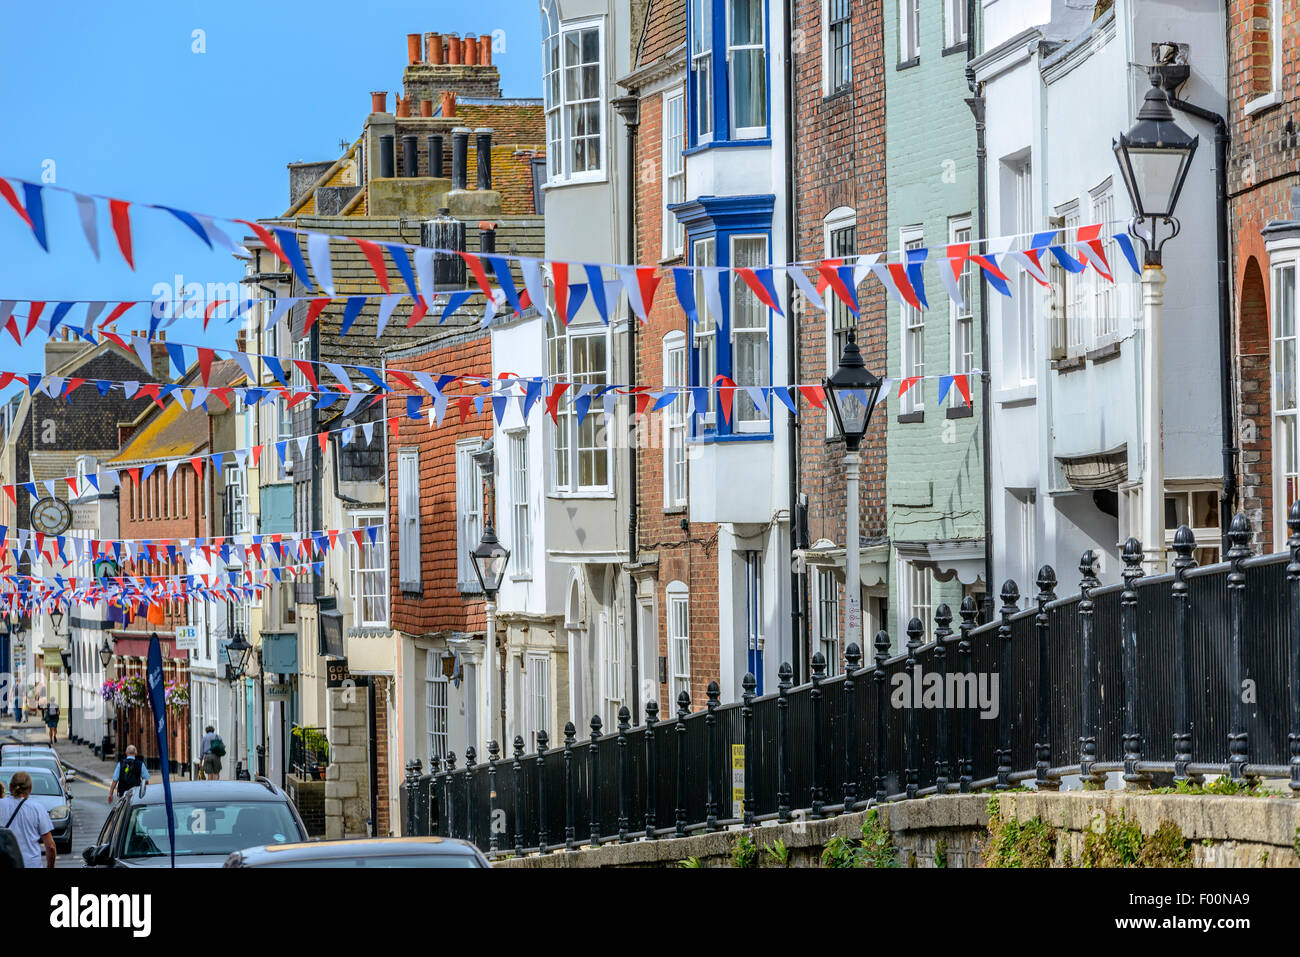 High Street, Old Town, Hastings, East Sussex, Reino Unido Foto de stock